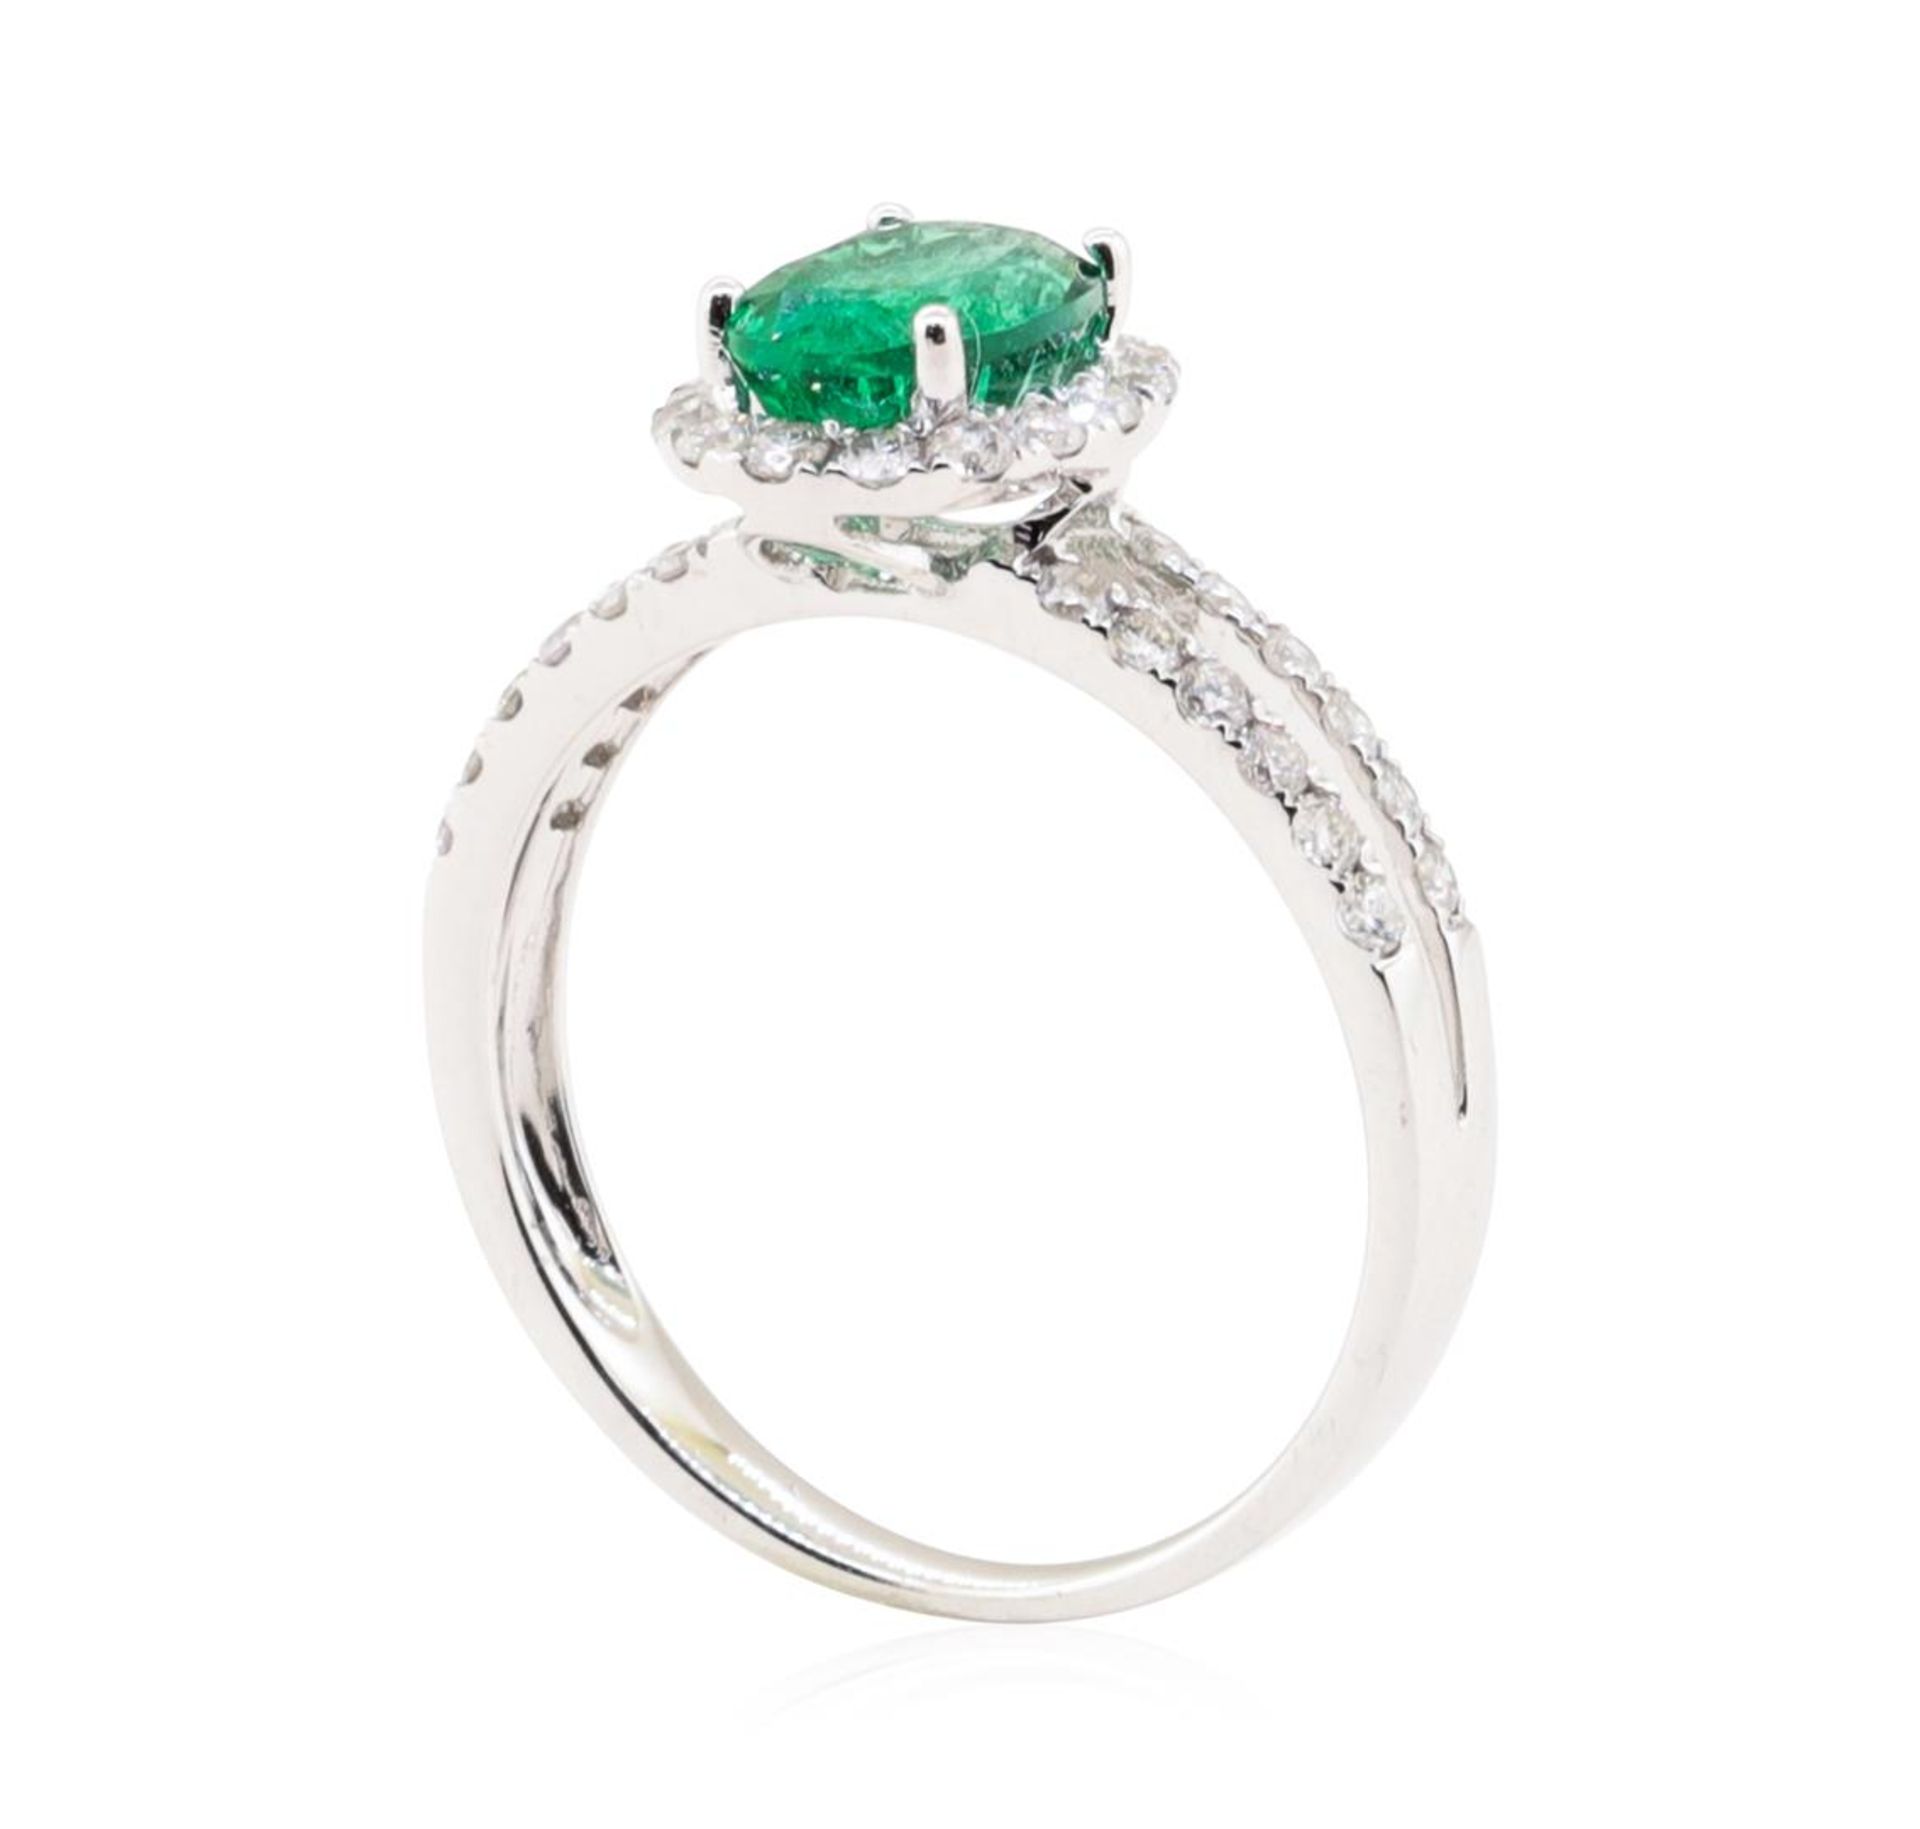 1.21 ctw Emerald and Diamond Ring - 18KT White Gold - Image 4 of 5